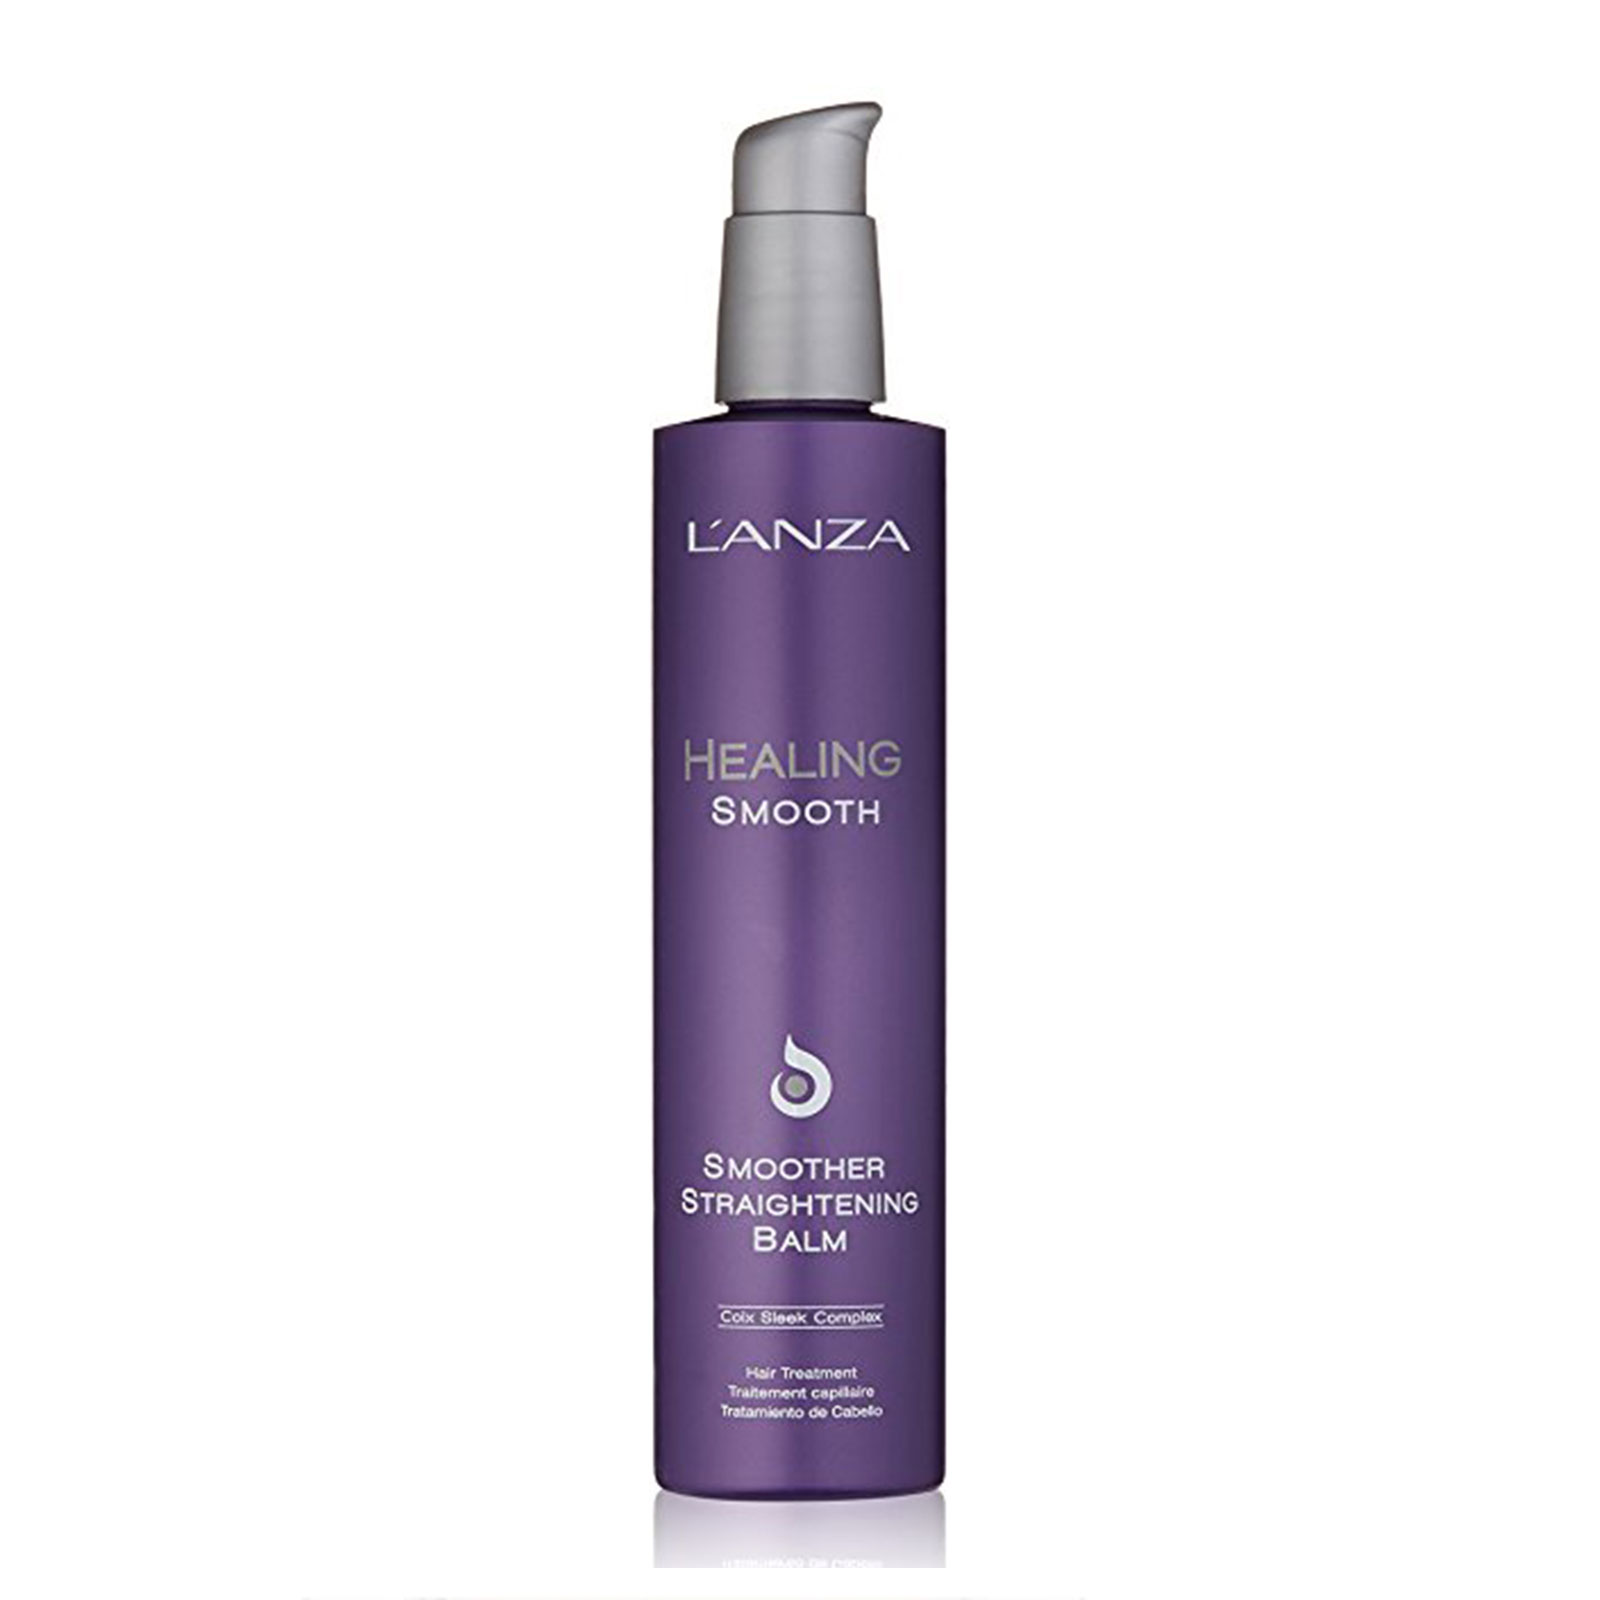 L'Anza Healing Smooth Smoother Straightening Balm 250Ml